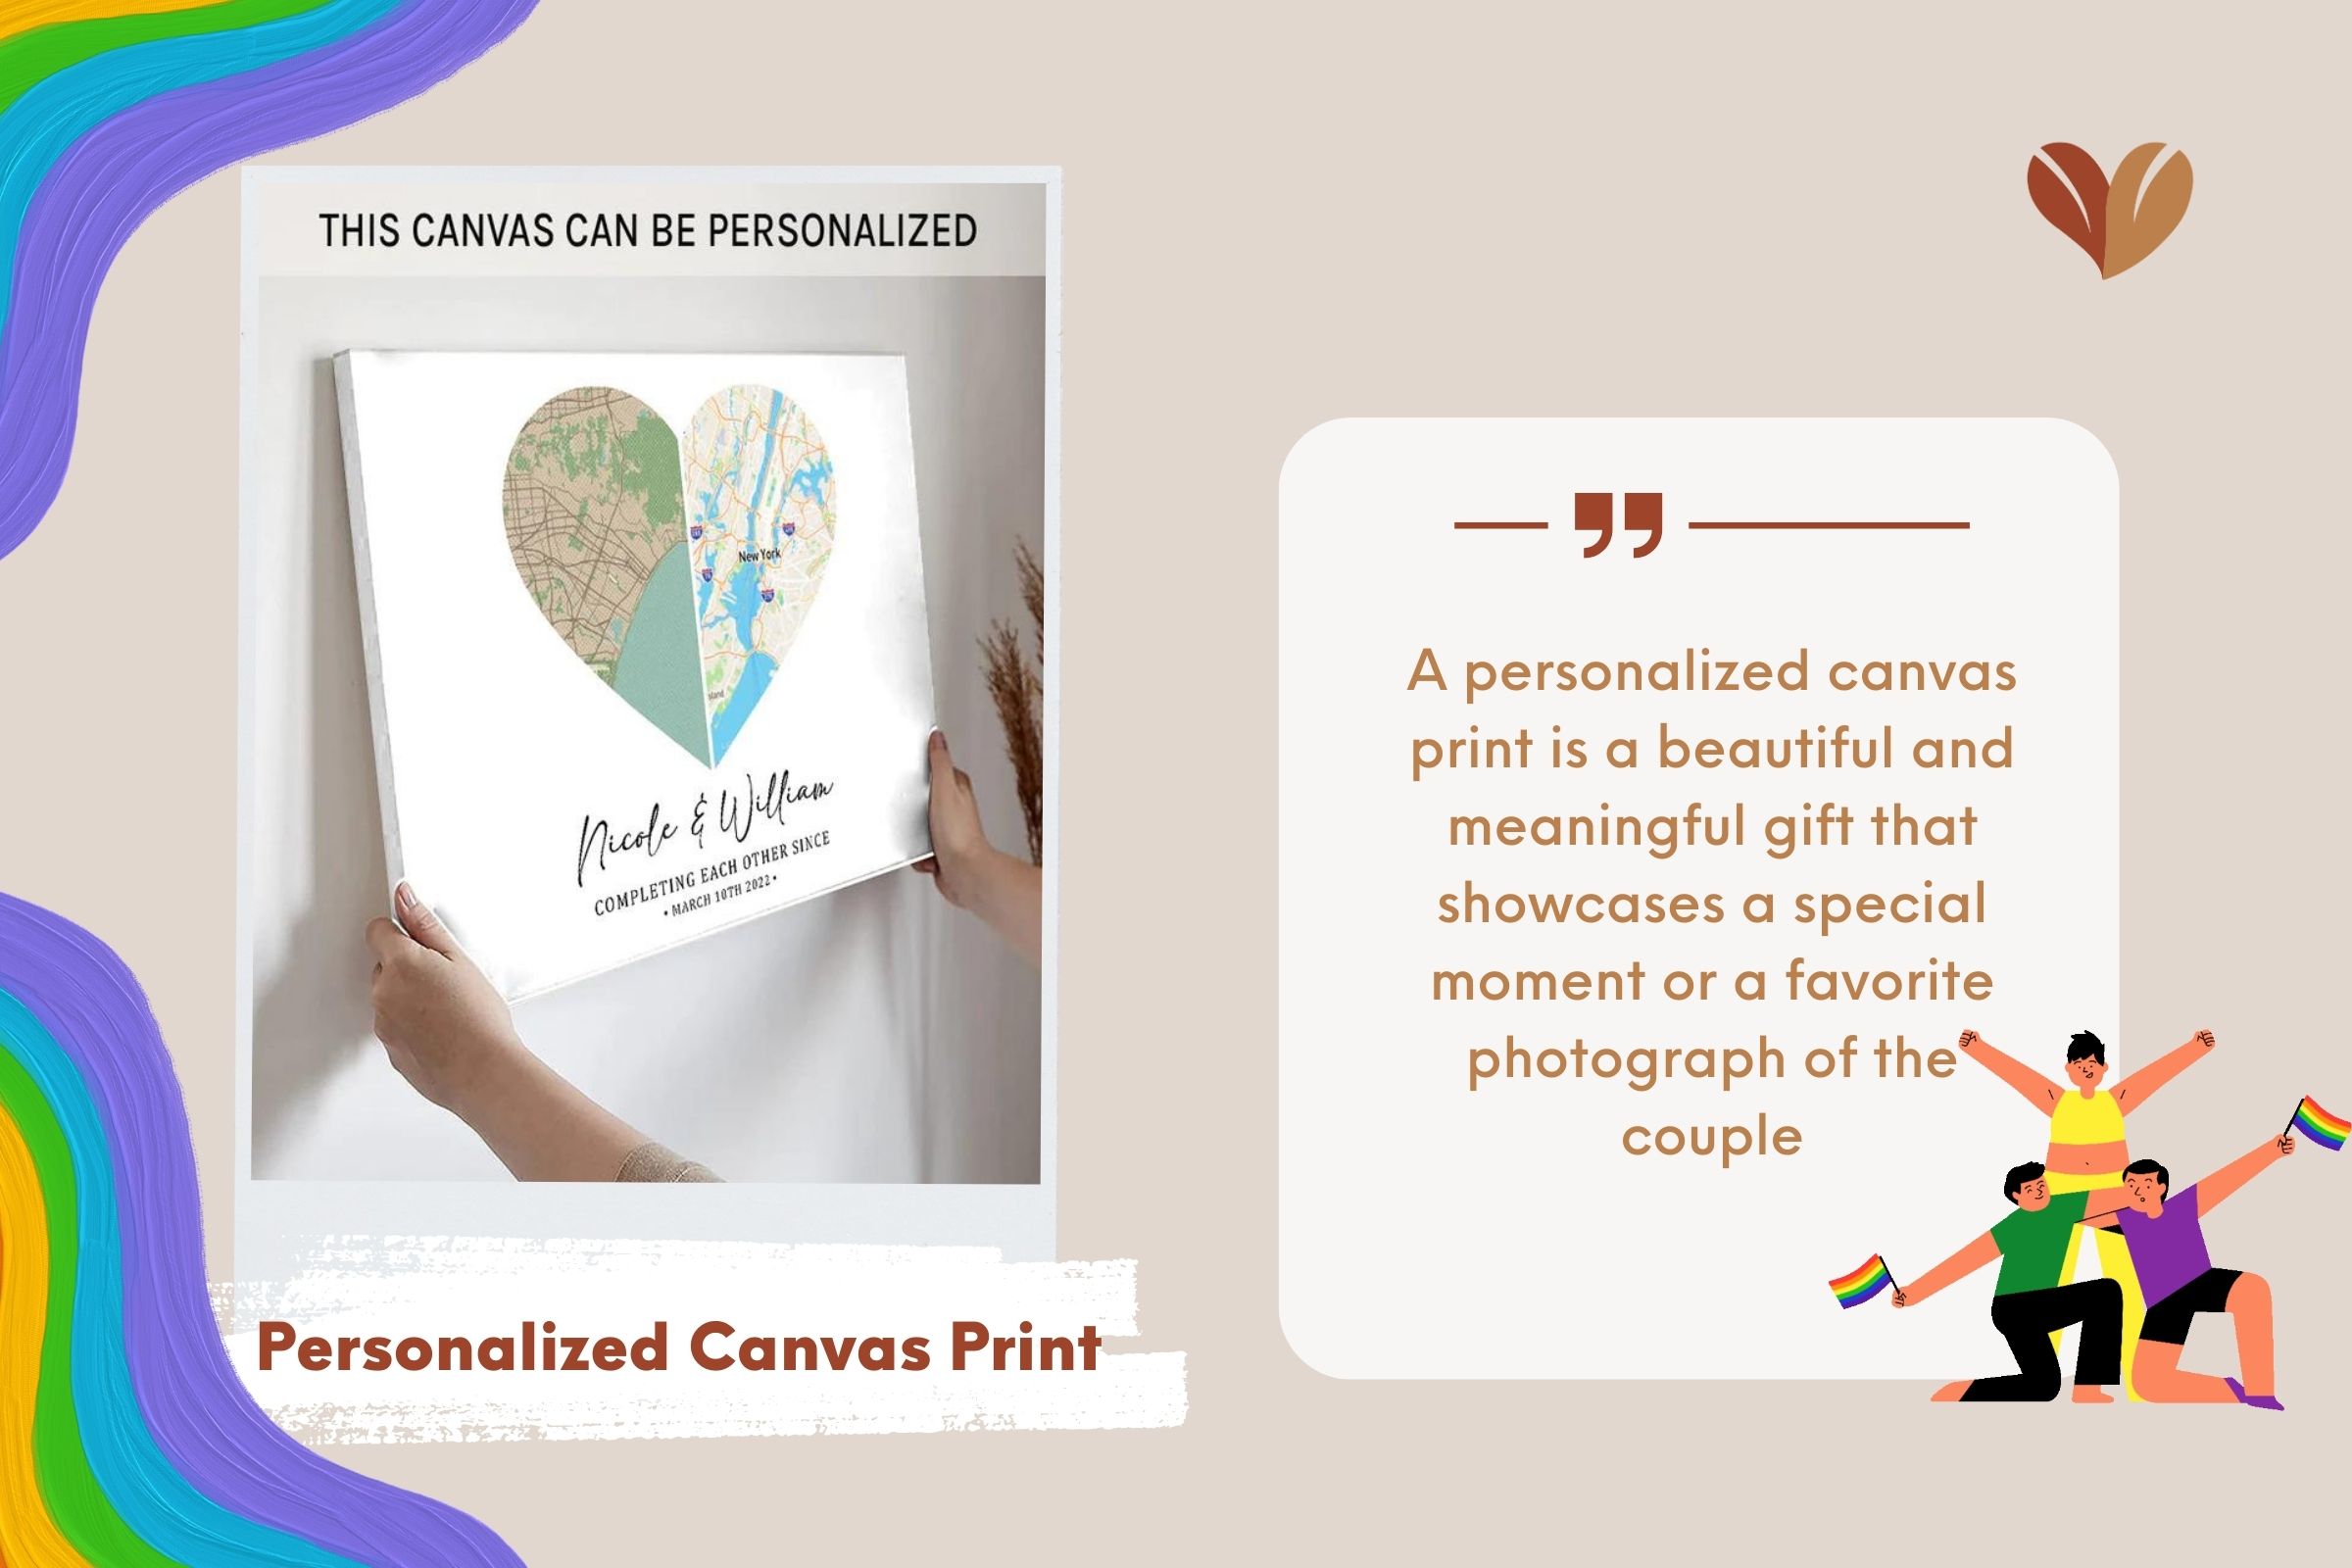 MyMindfulGifts offers a wide range of customizable canvas prints